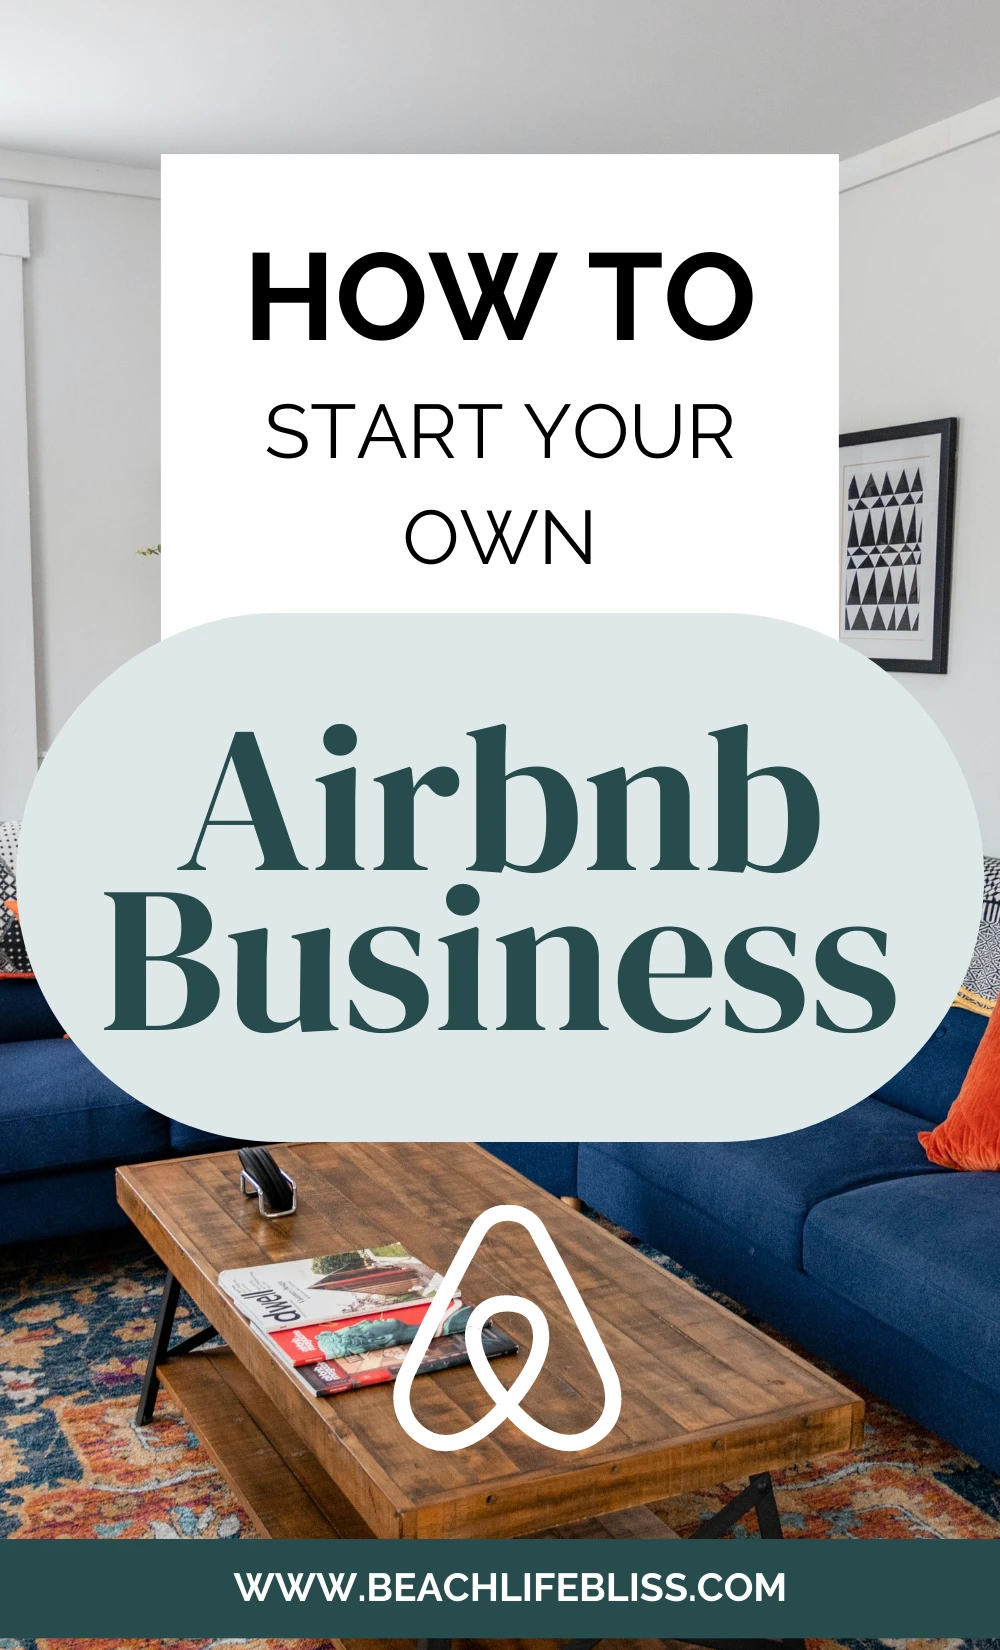 Details on each of the Airbnb tips